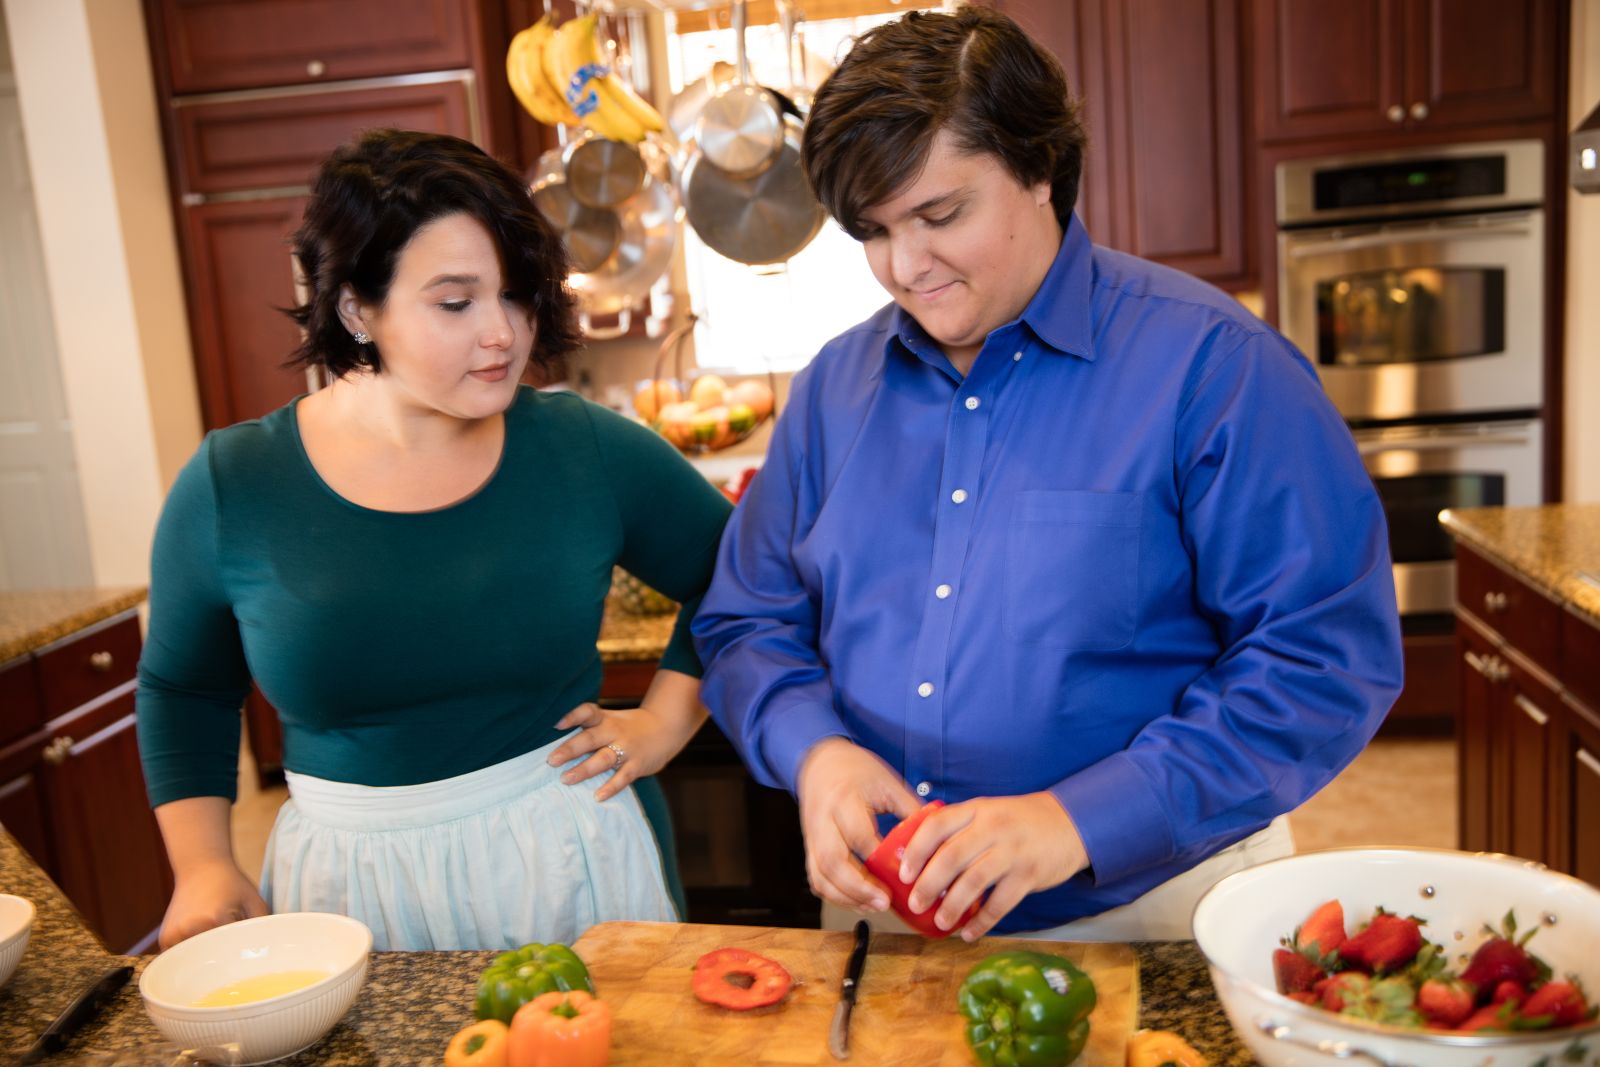 Two people cook a nutritious meal together to maintain a healthy body weight